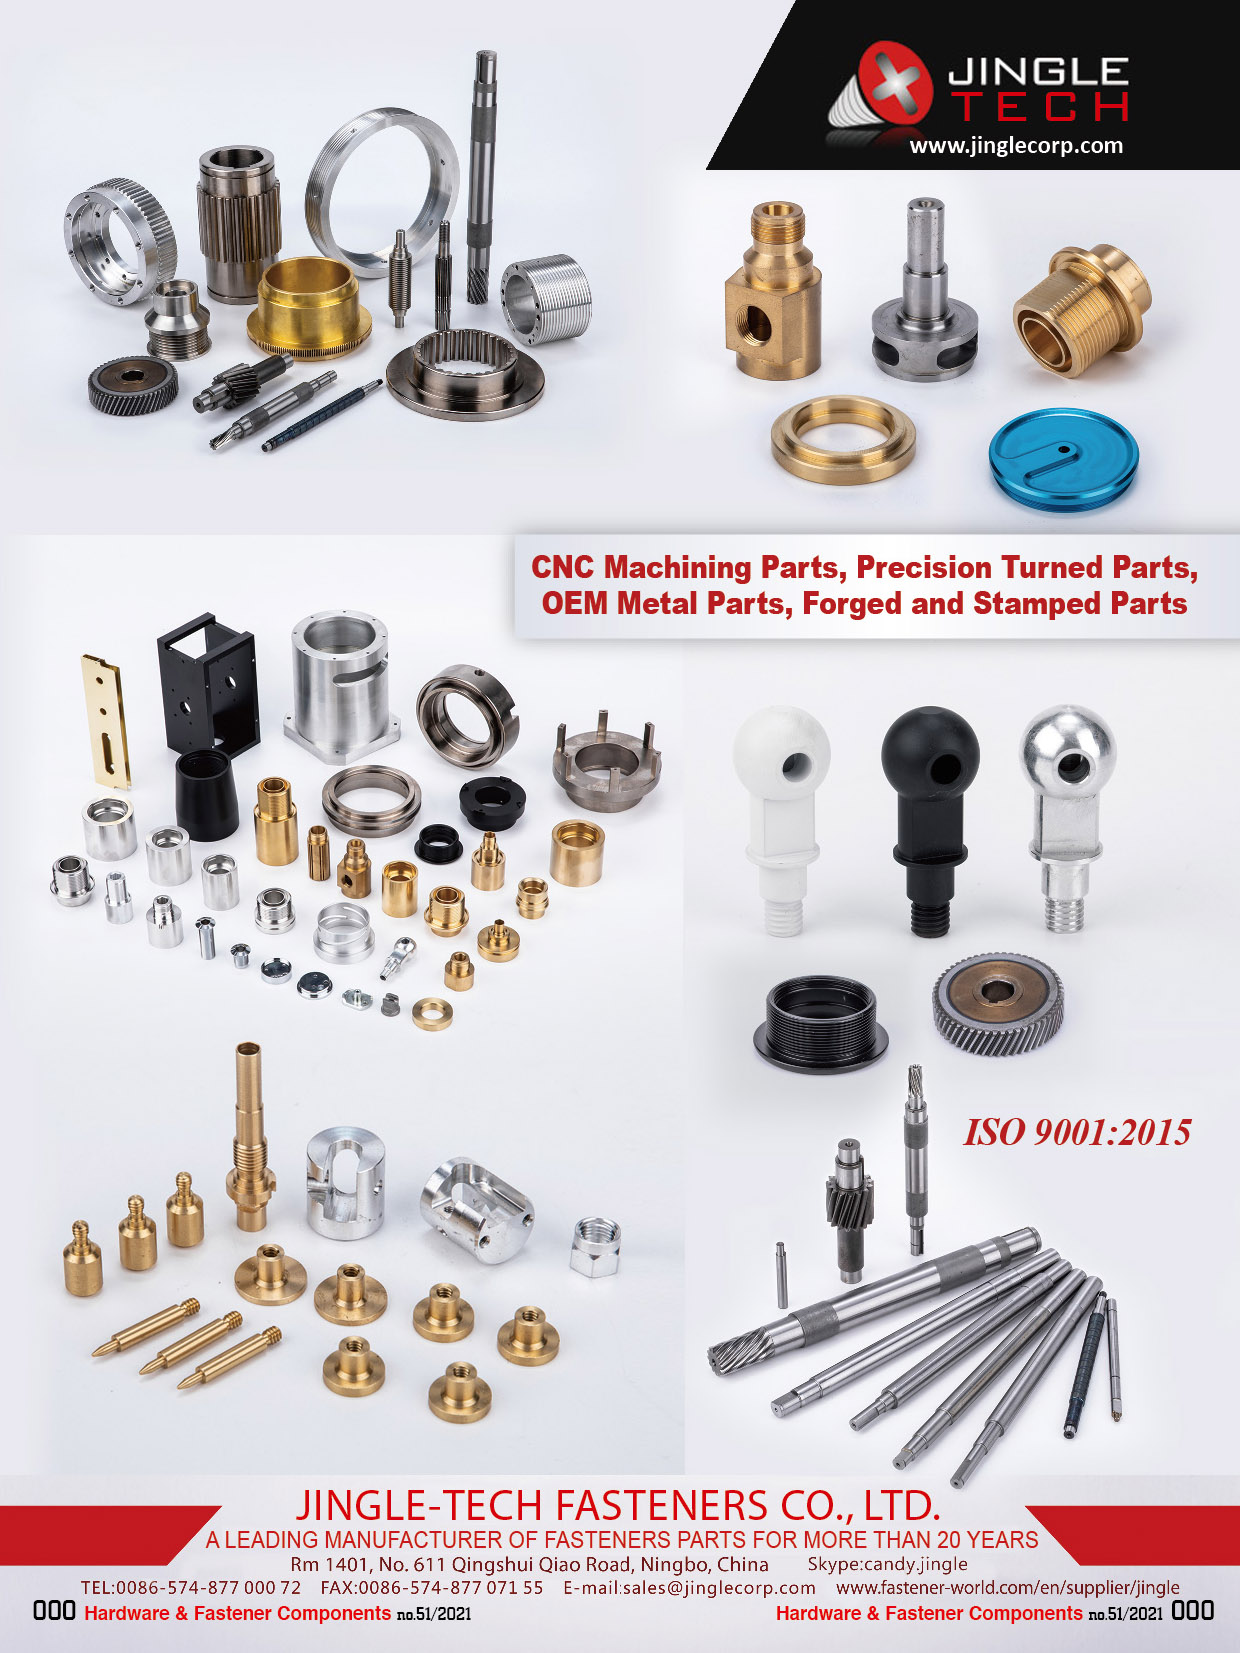 JINGLE-TECH FASTENERS CO., LTD. , Standard & Non-Standard Fasteners,CNC Nachining Parts,Precision Turned Parts,OEM Metal Parts,Forged and Stamped Parts , Non-standard Hexagon Head Screws / Bolts